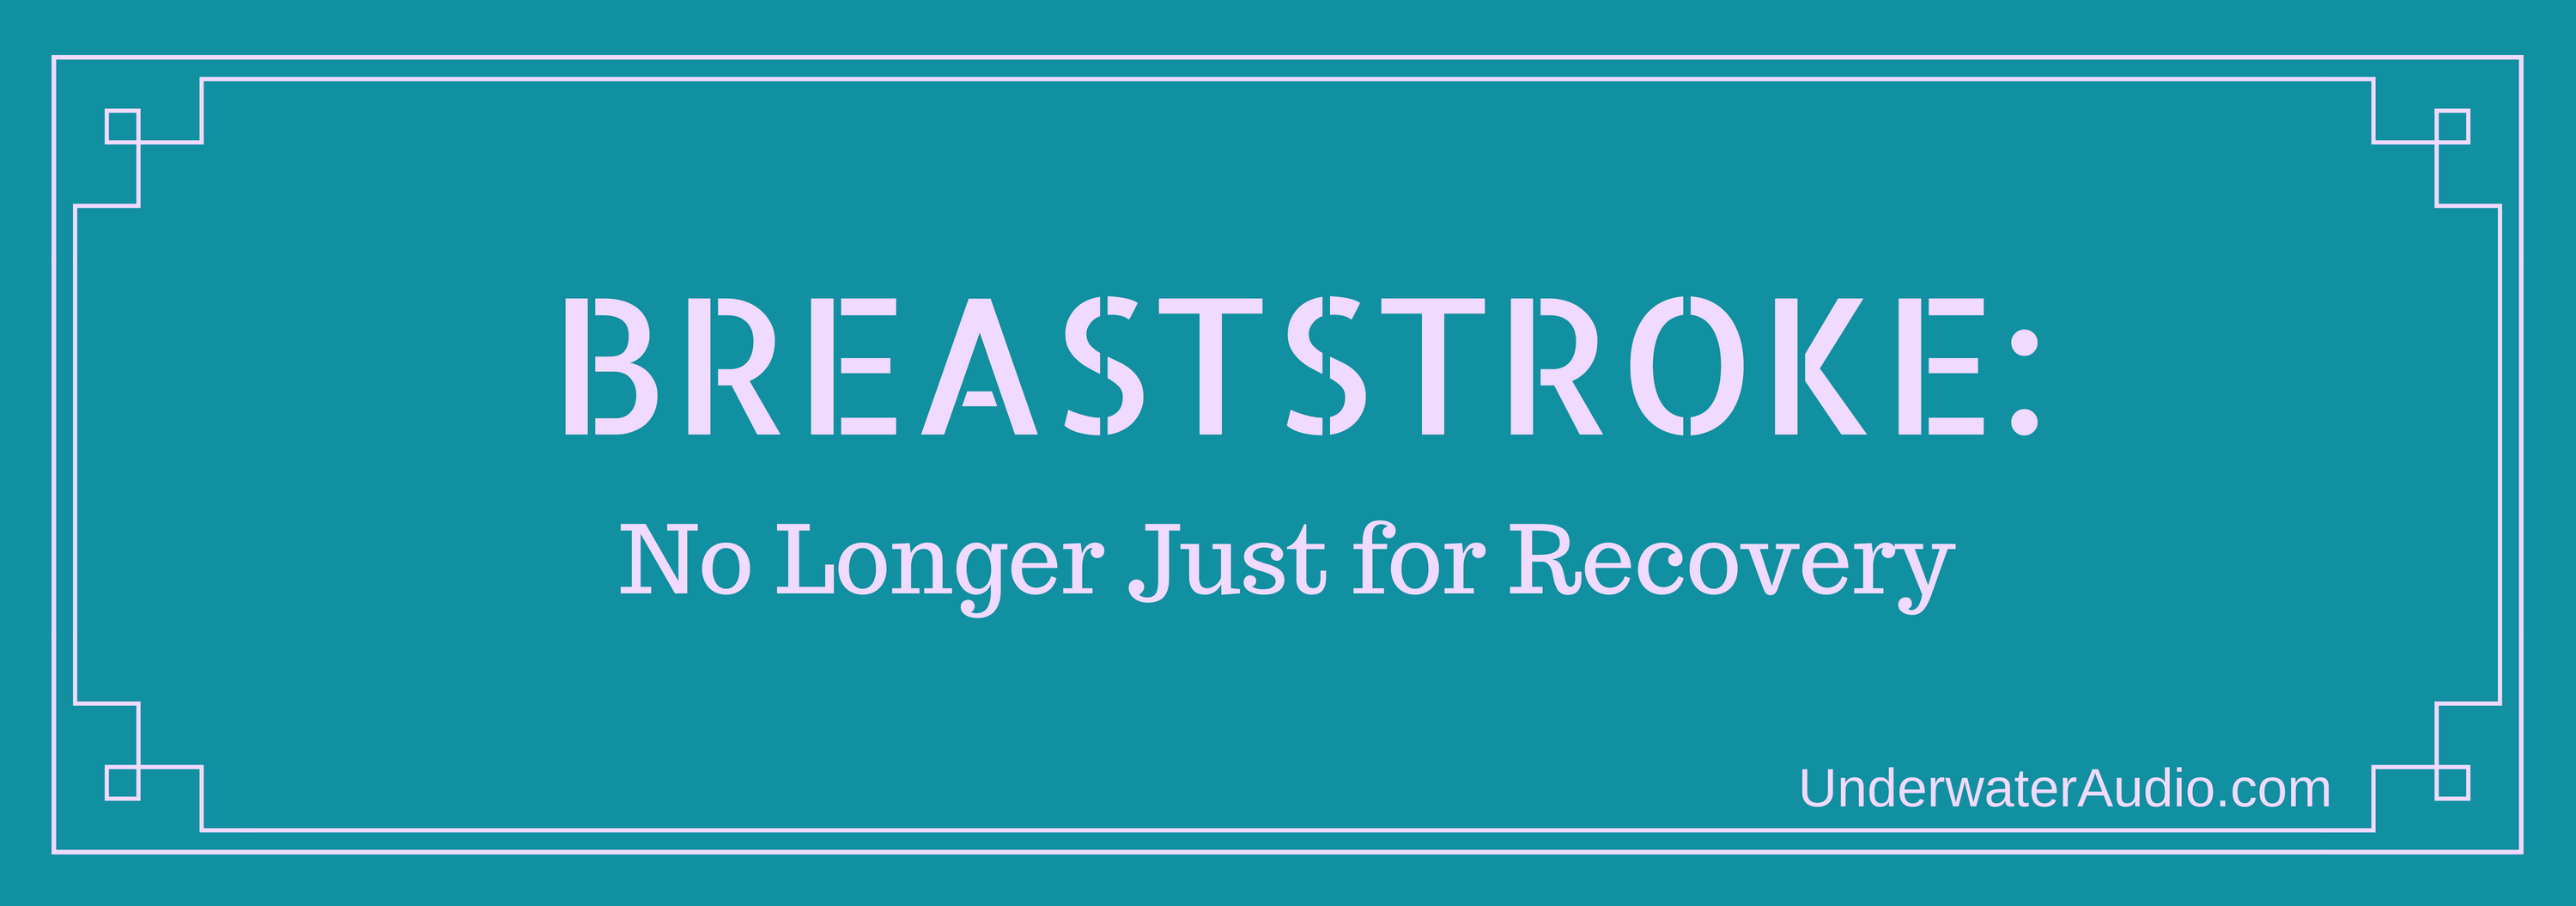 Breaststroke: No Longer Just for Recovery